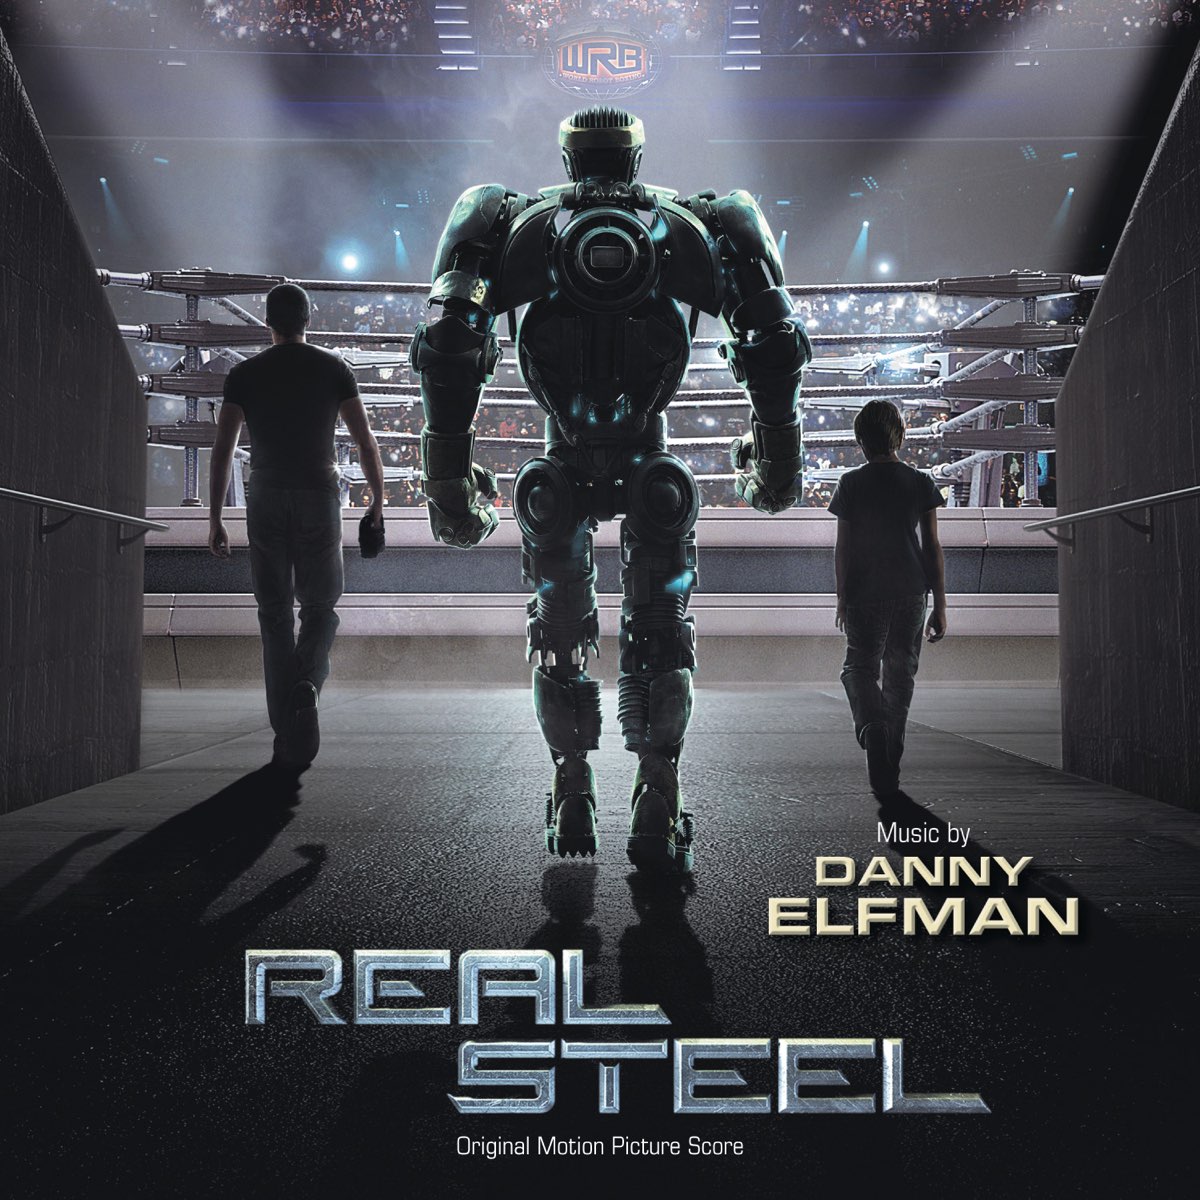 Real Steel (Original Motion Picture Score) by Danny Elfman on Apple Music